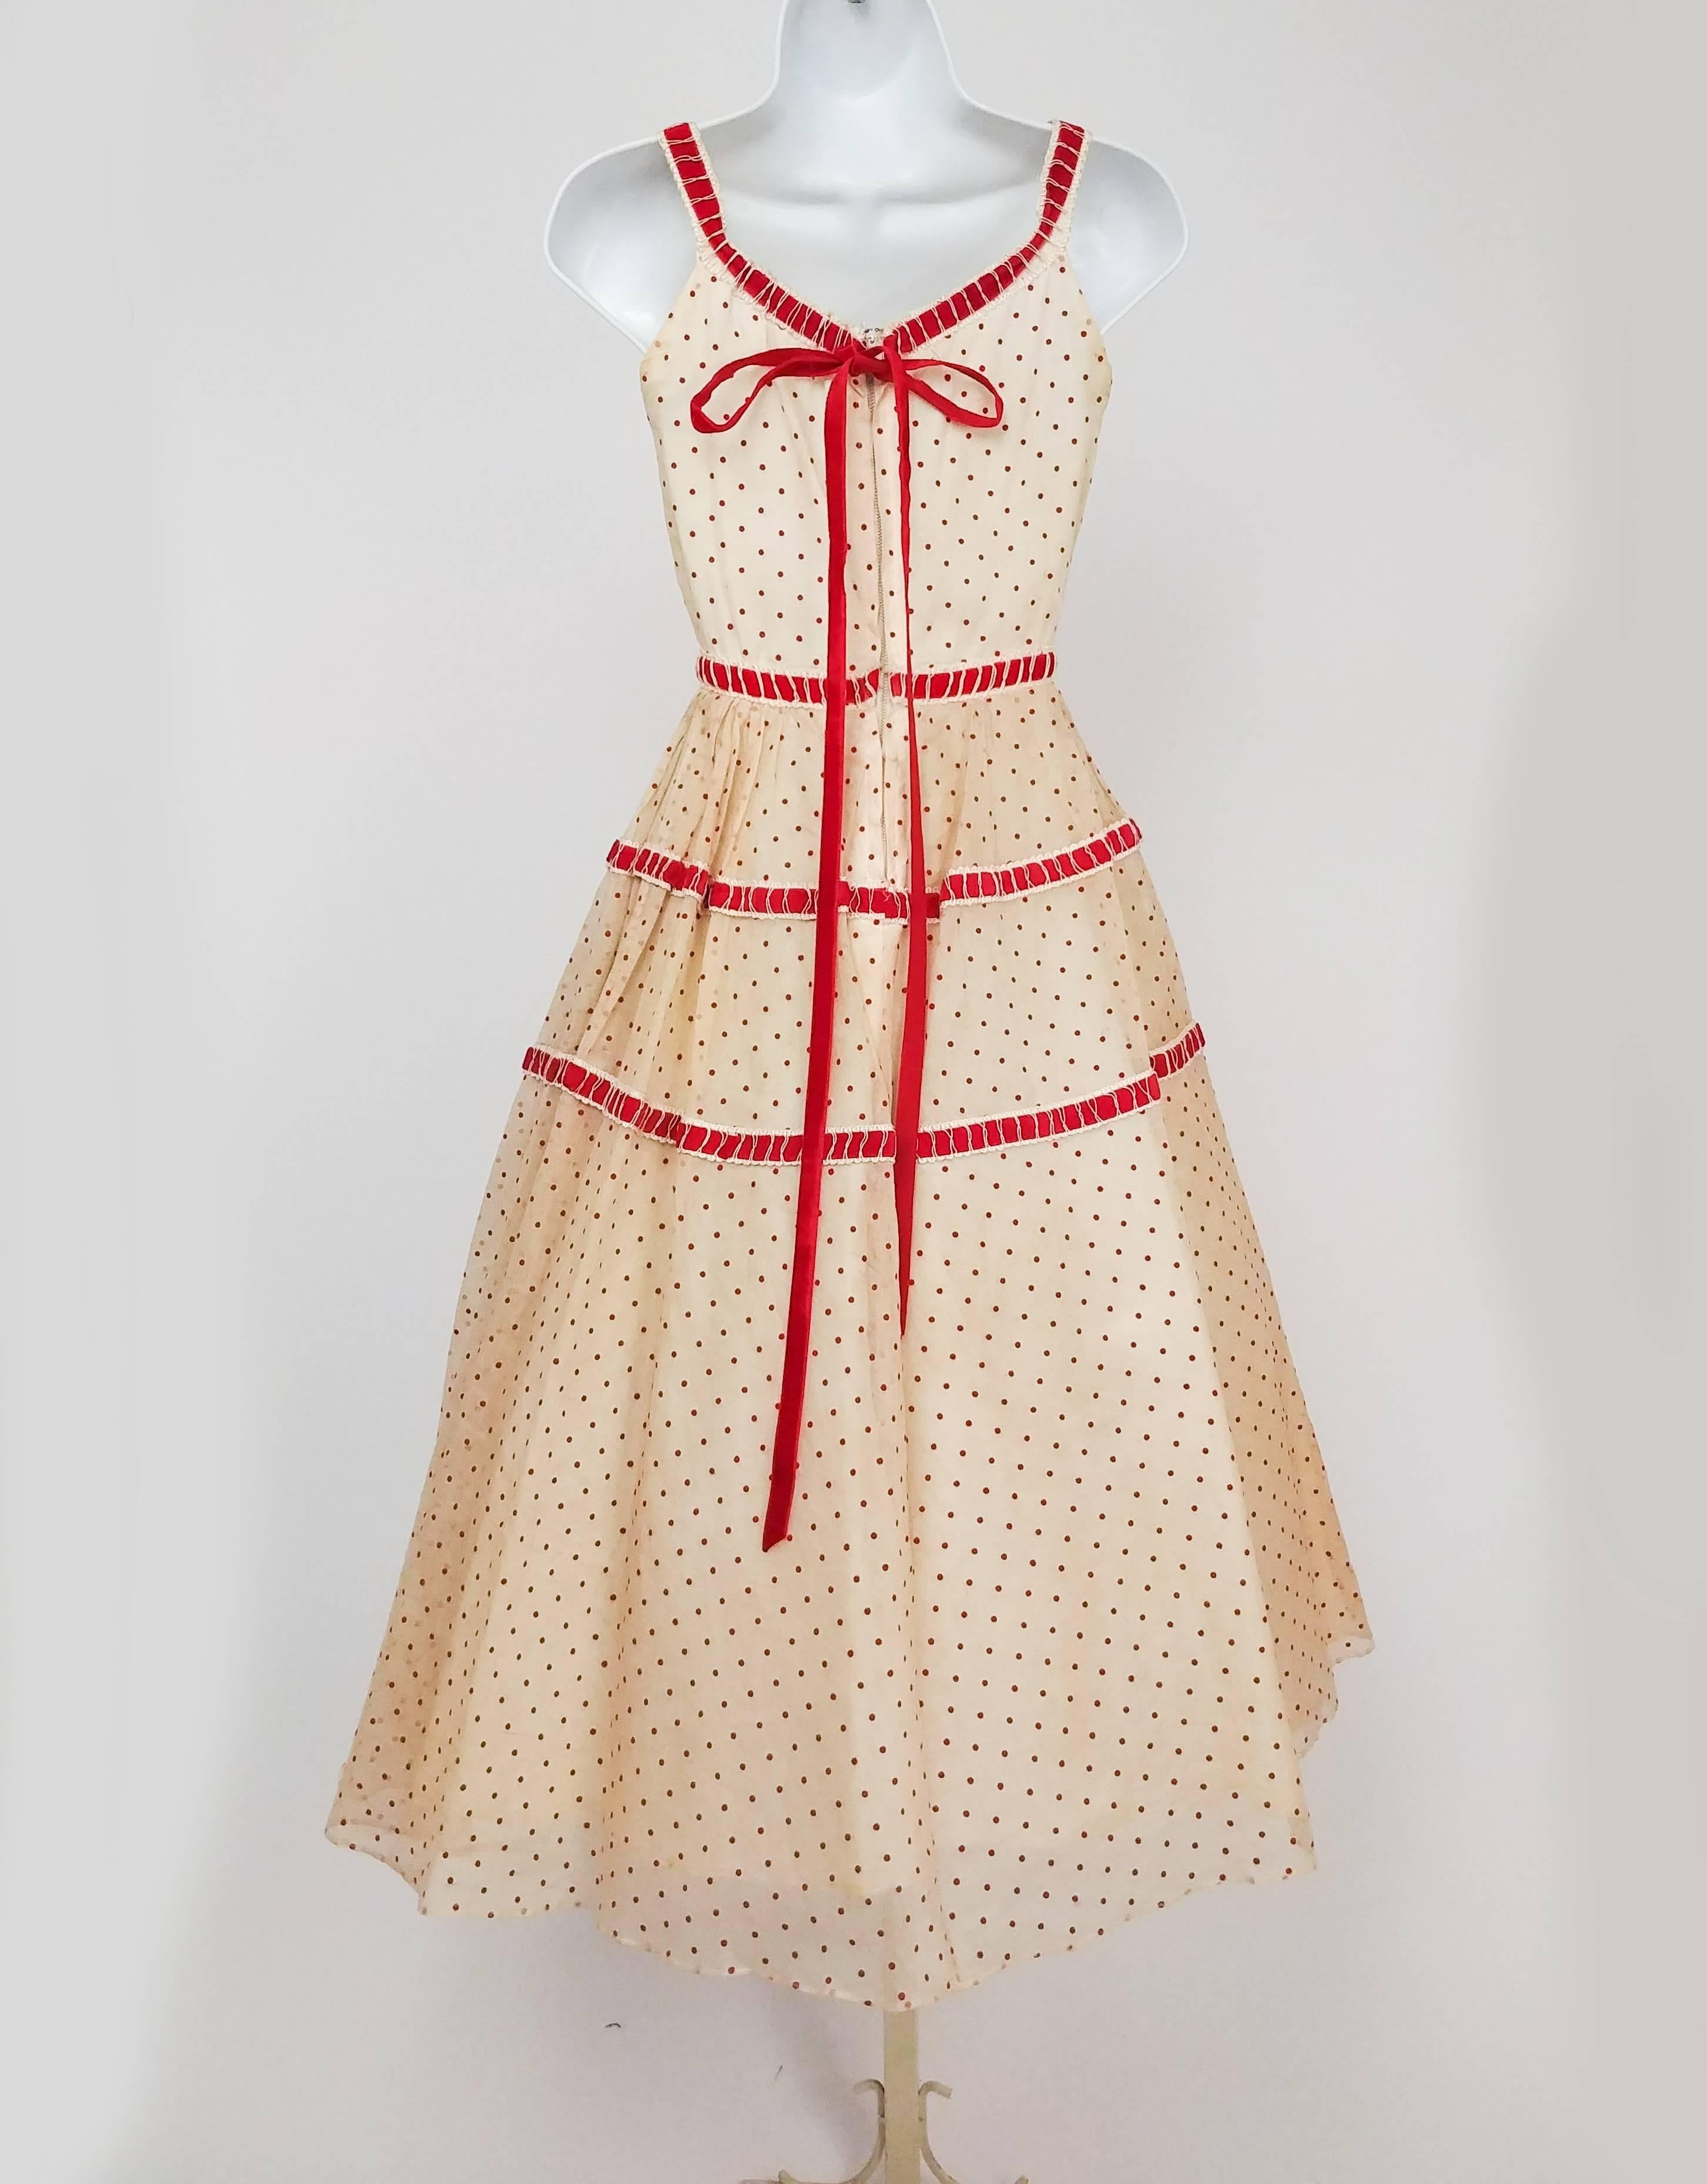 White & Red Organza Polka Dot Party Dress, 1950s. Silk organza dress with red flocked velvet polka dots and velvet ribbon trim, including adorable velvet ribbon bow at back over the metal zipper closure. In a petite size. Dress is photographed over